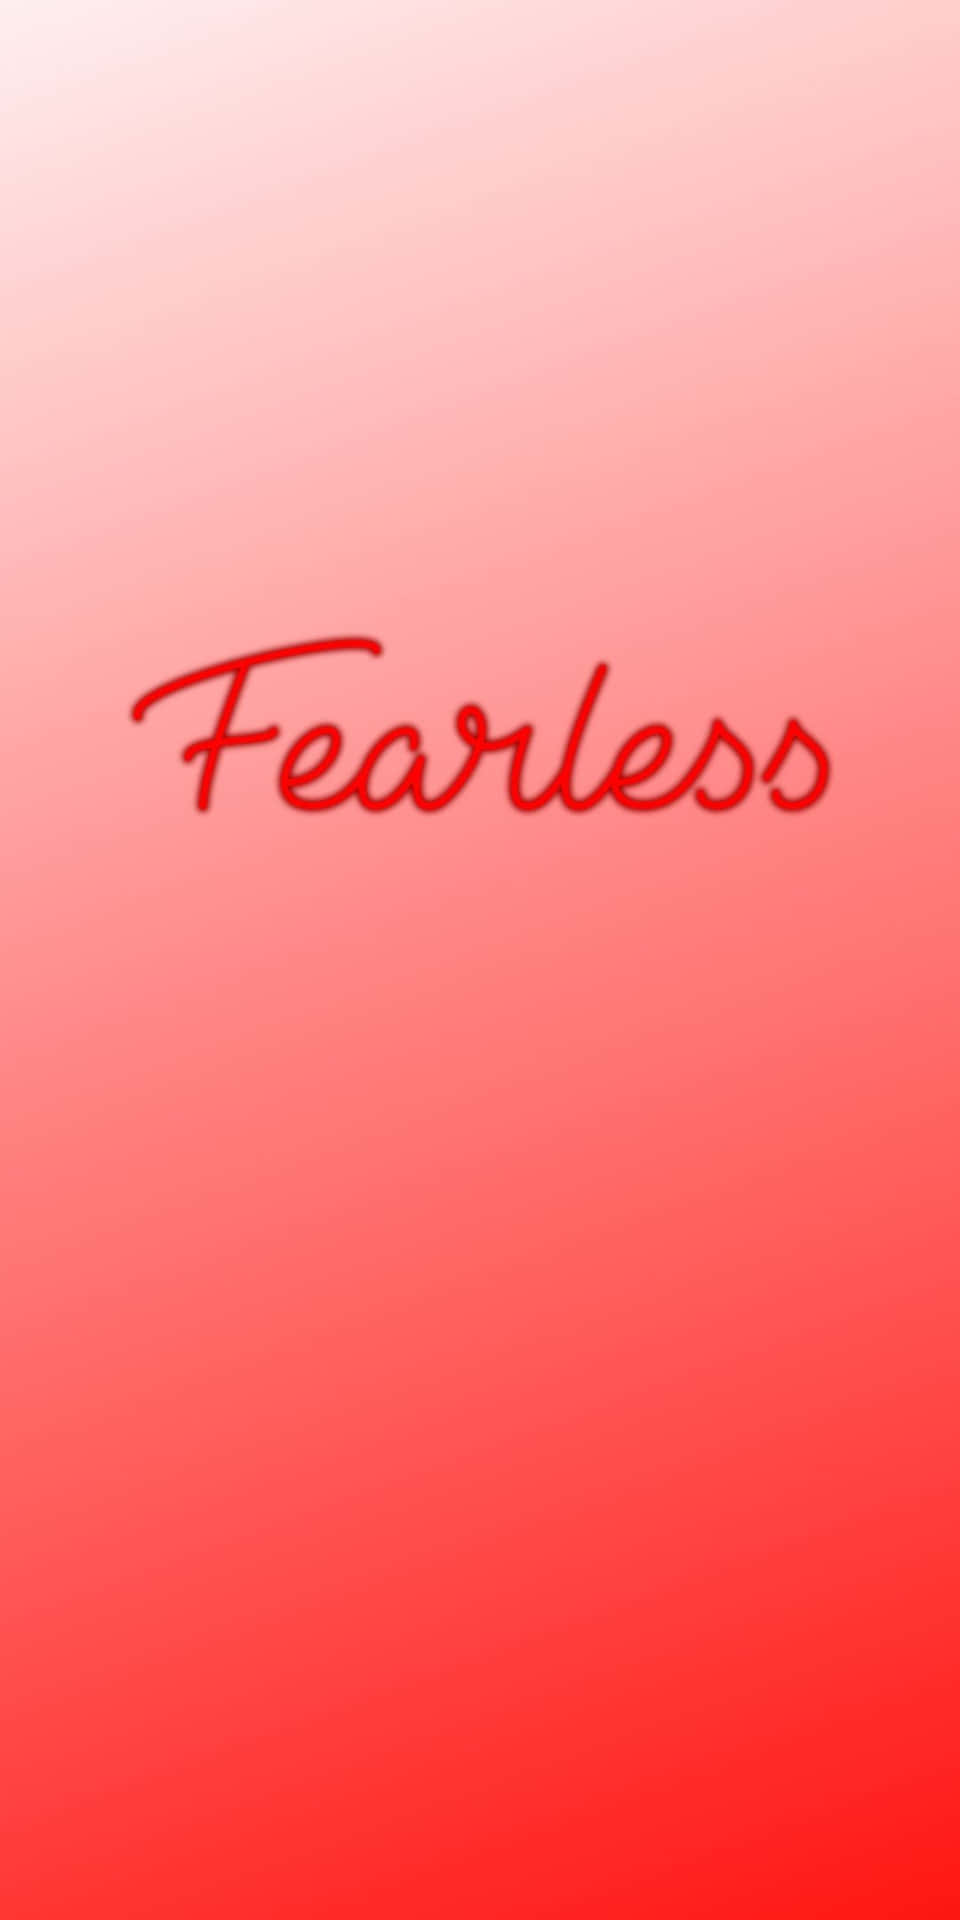 Fearless Typography Red Gradient Background